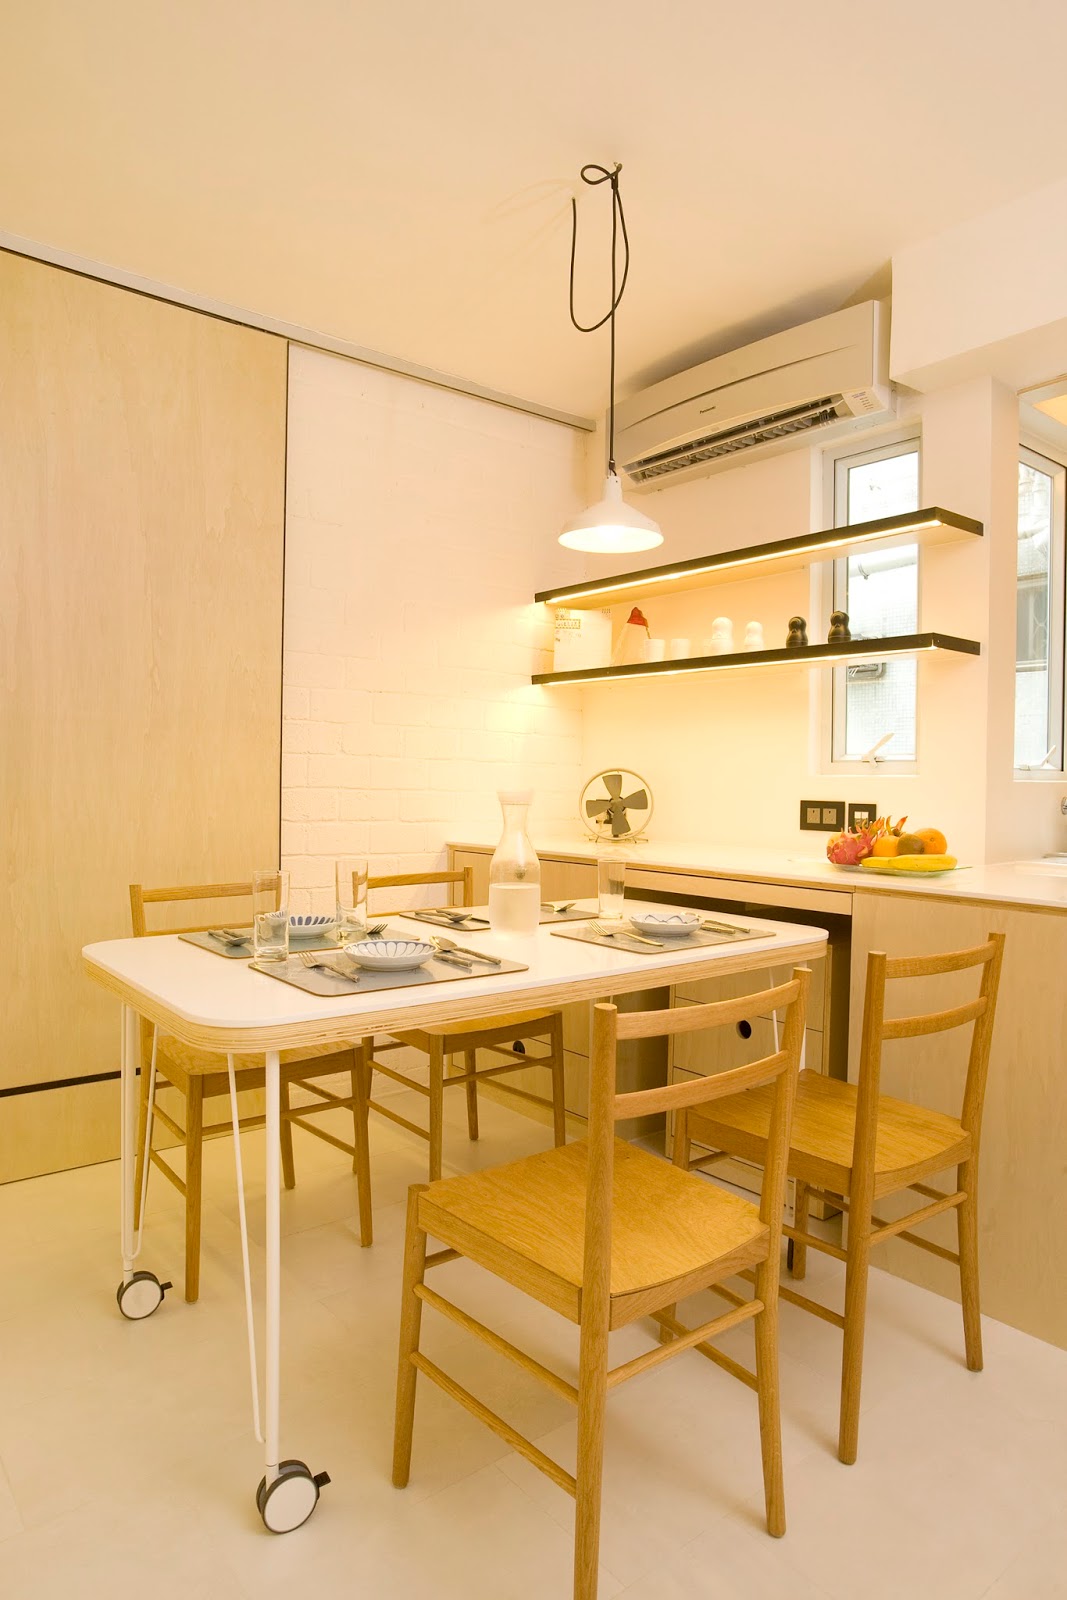 Must-have gadgets for small spaces in Hong Kong